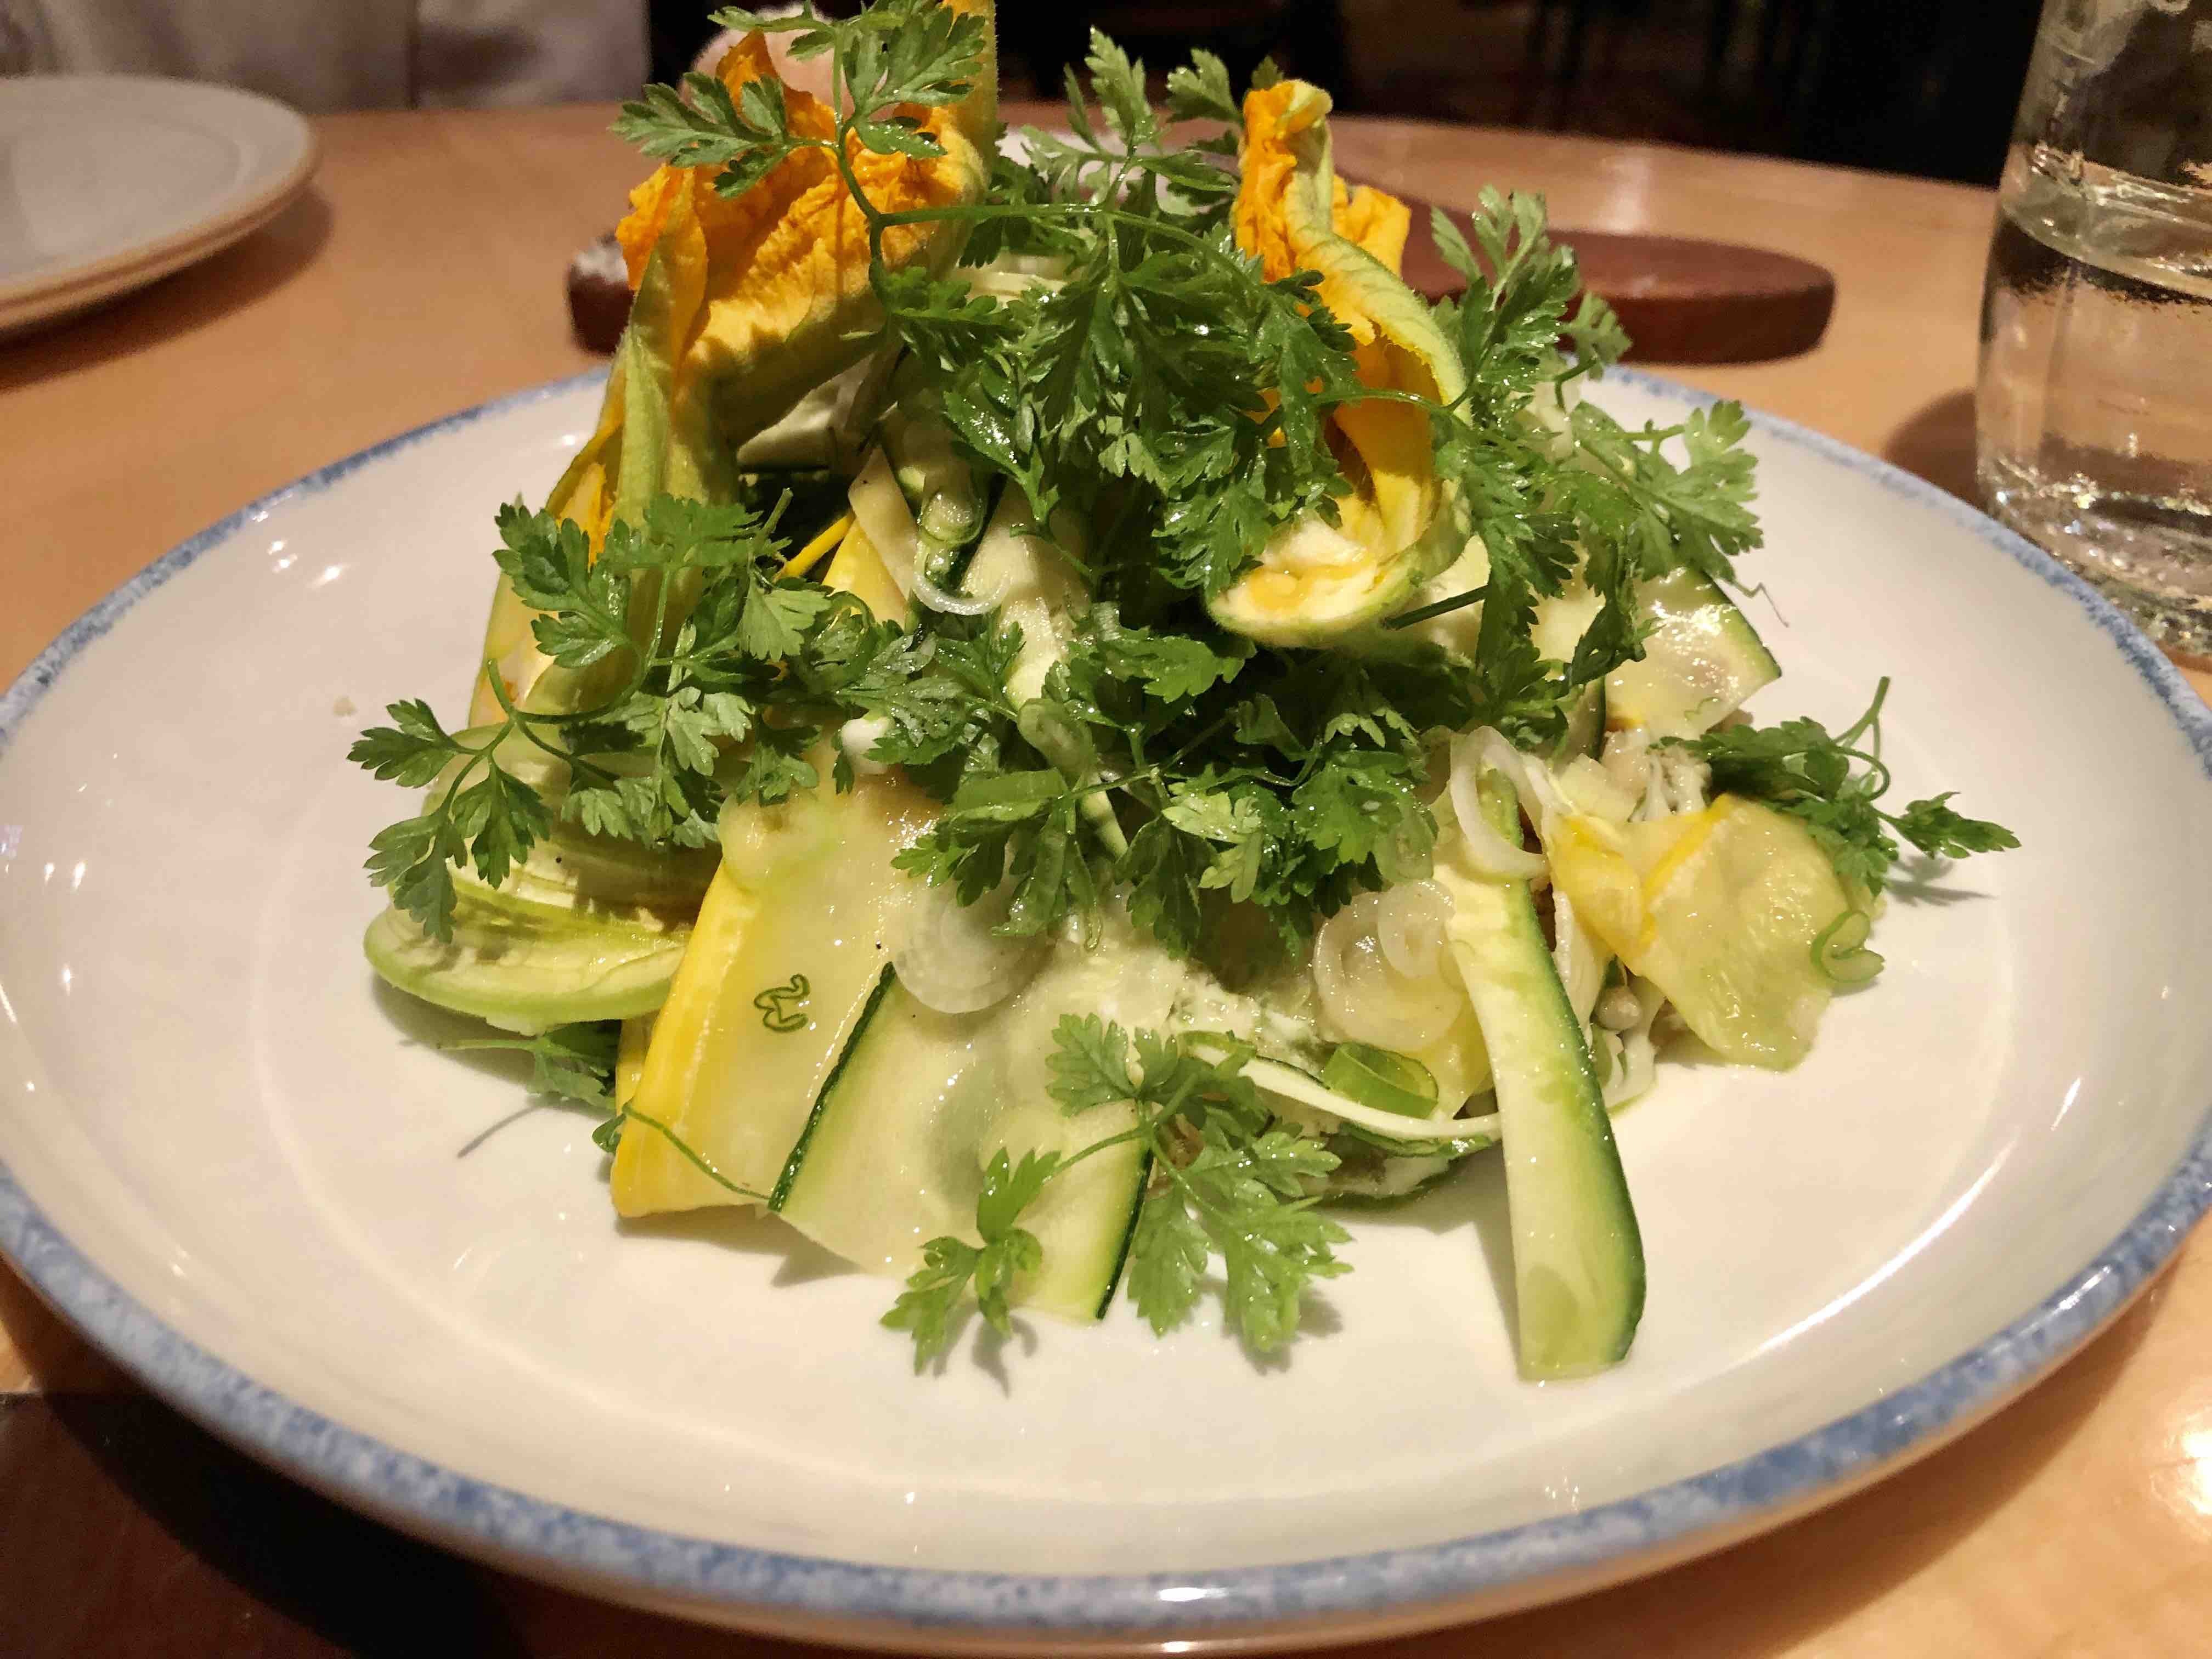 JAM London Chiltern Firehouse Courgette Salad